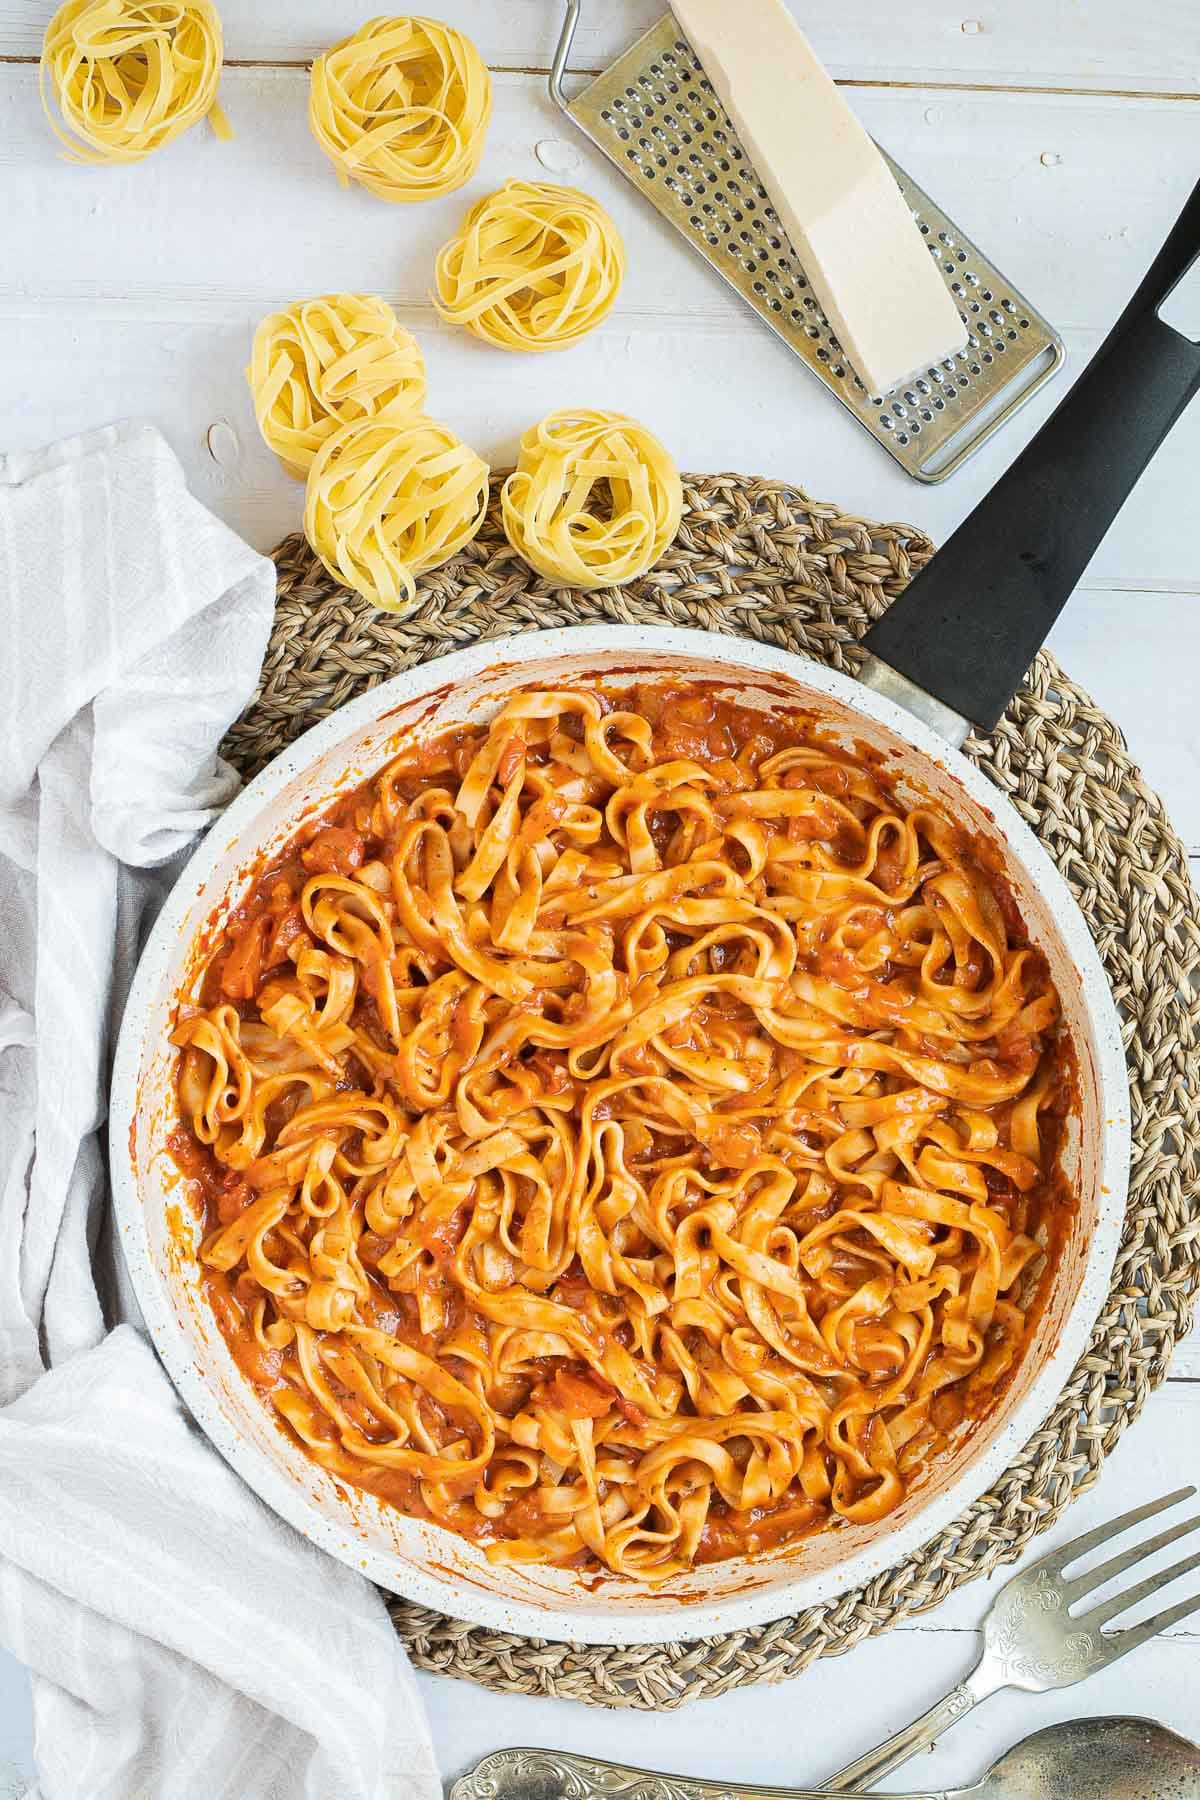 Tagliatelle is mixed in and covered with a creamy light red tomato-based sauce in a white frying pan. Dry tagliatelle pasta and a cheese grater with parmesan cheese is next to it.